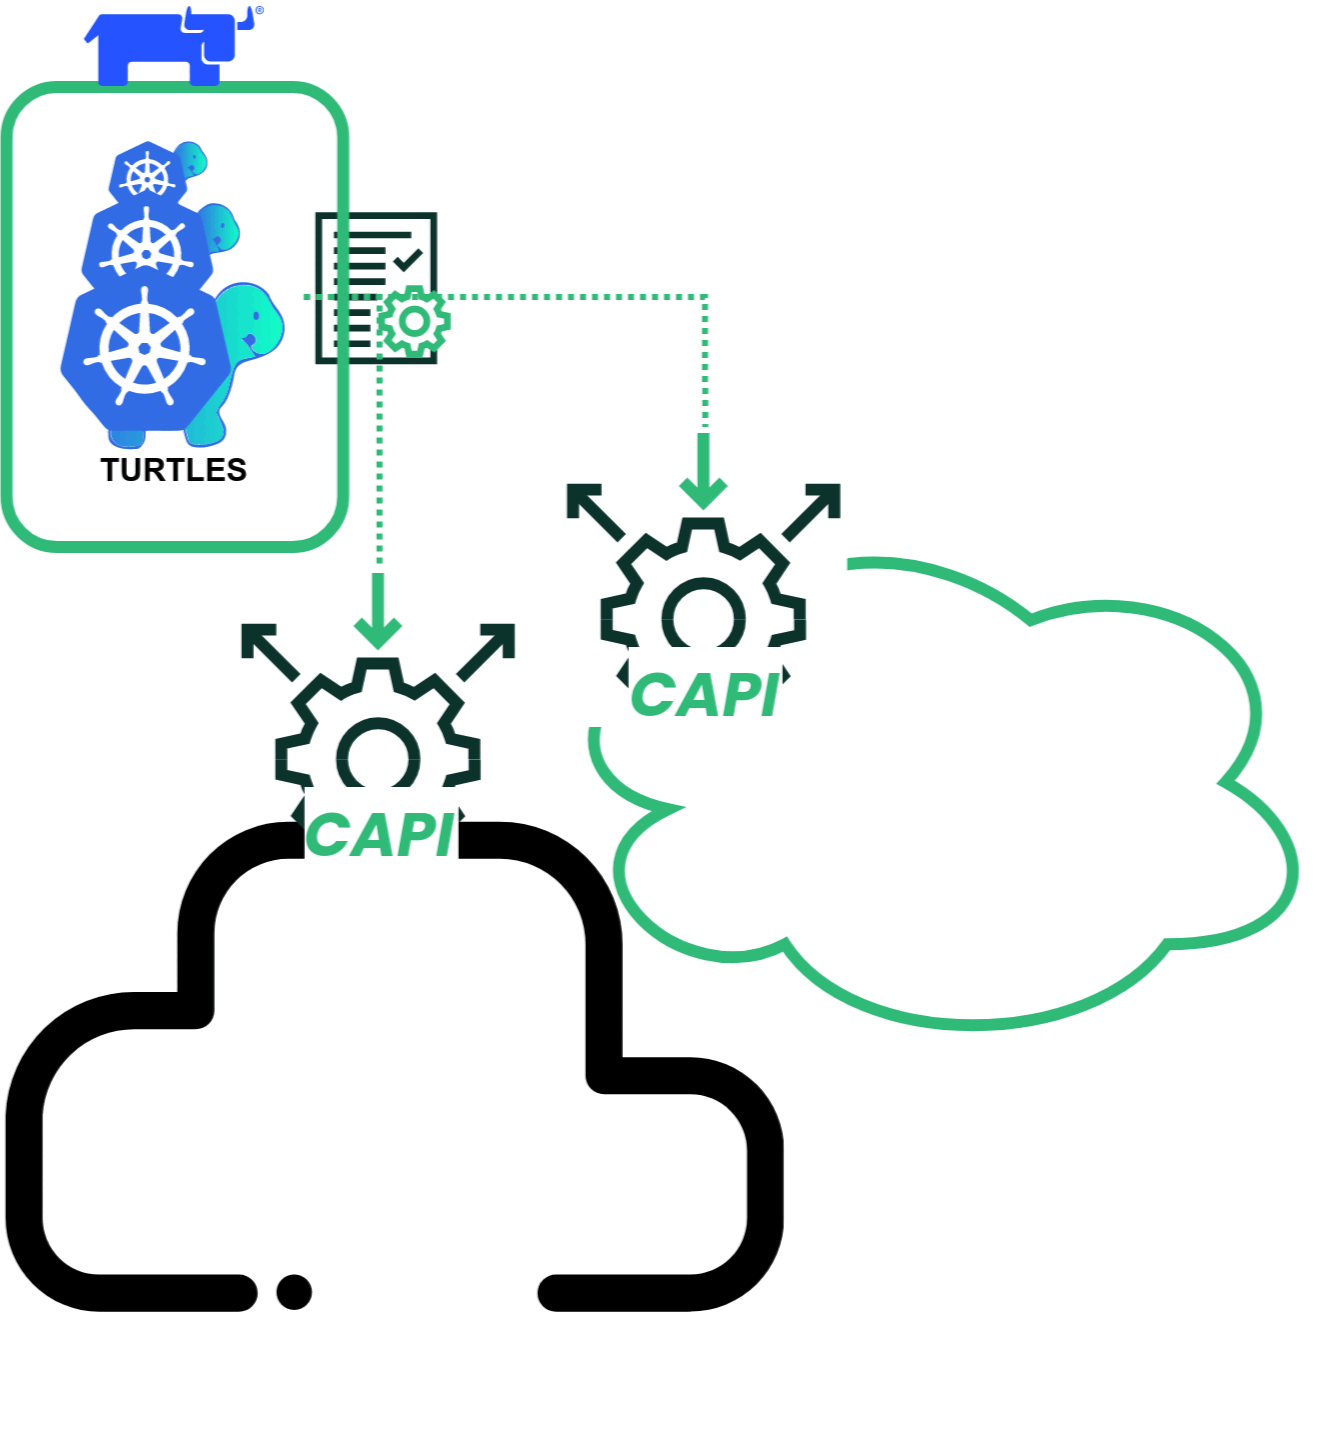 Animation showing Turtles using CAPI to deploy Kubernetes clusters on 2 different infrastructure providers